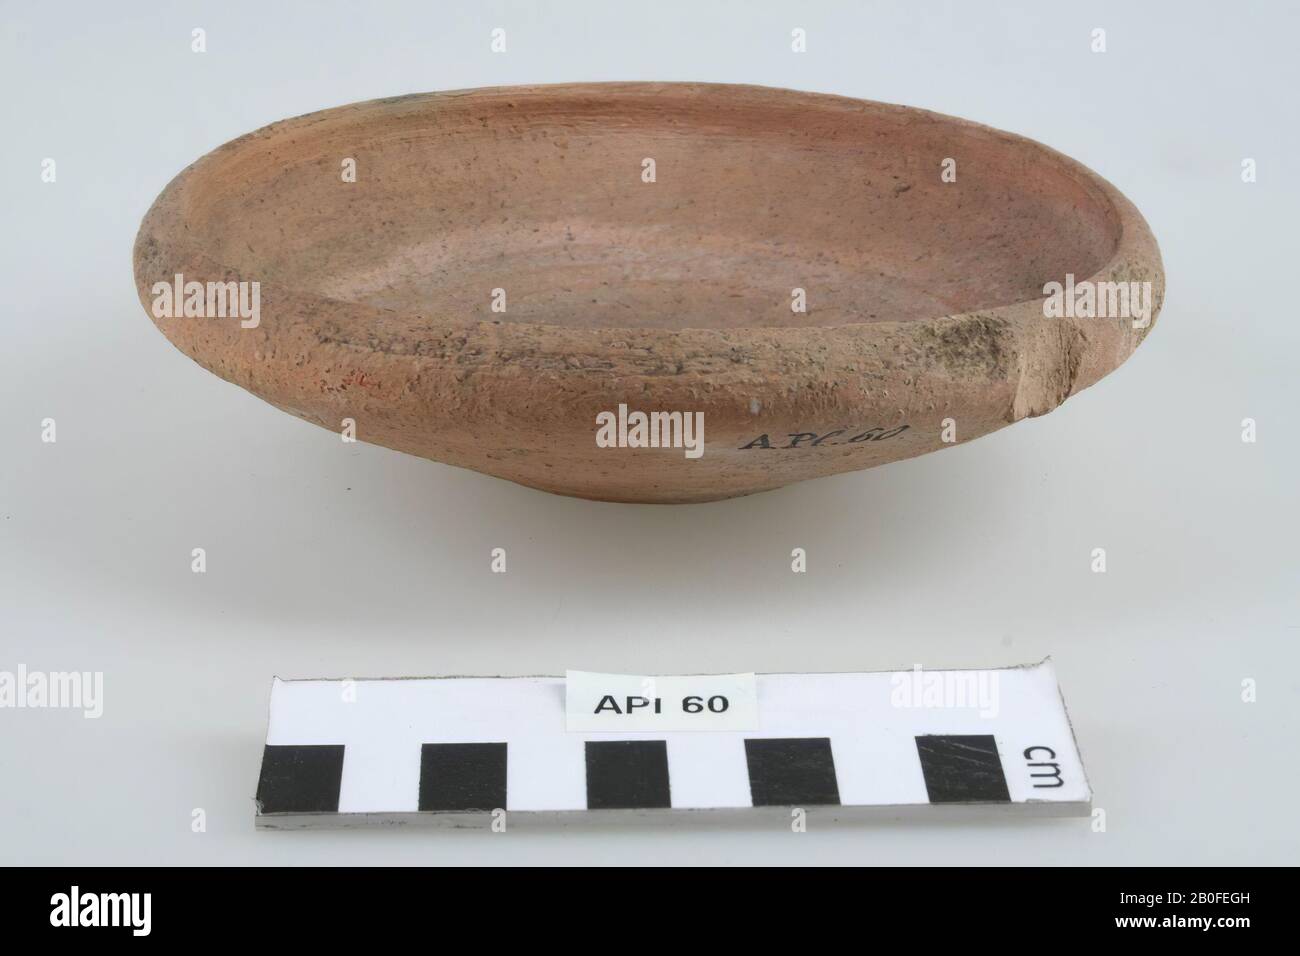 Scale with slanted wall. Two chip from the edge of the mouth, hairline cracks over almost the entire width., Dish, earthenware (rough wall), h: 4.3 cm, diam: 16 cm, vmeb 350-450, Germany Stock Photo